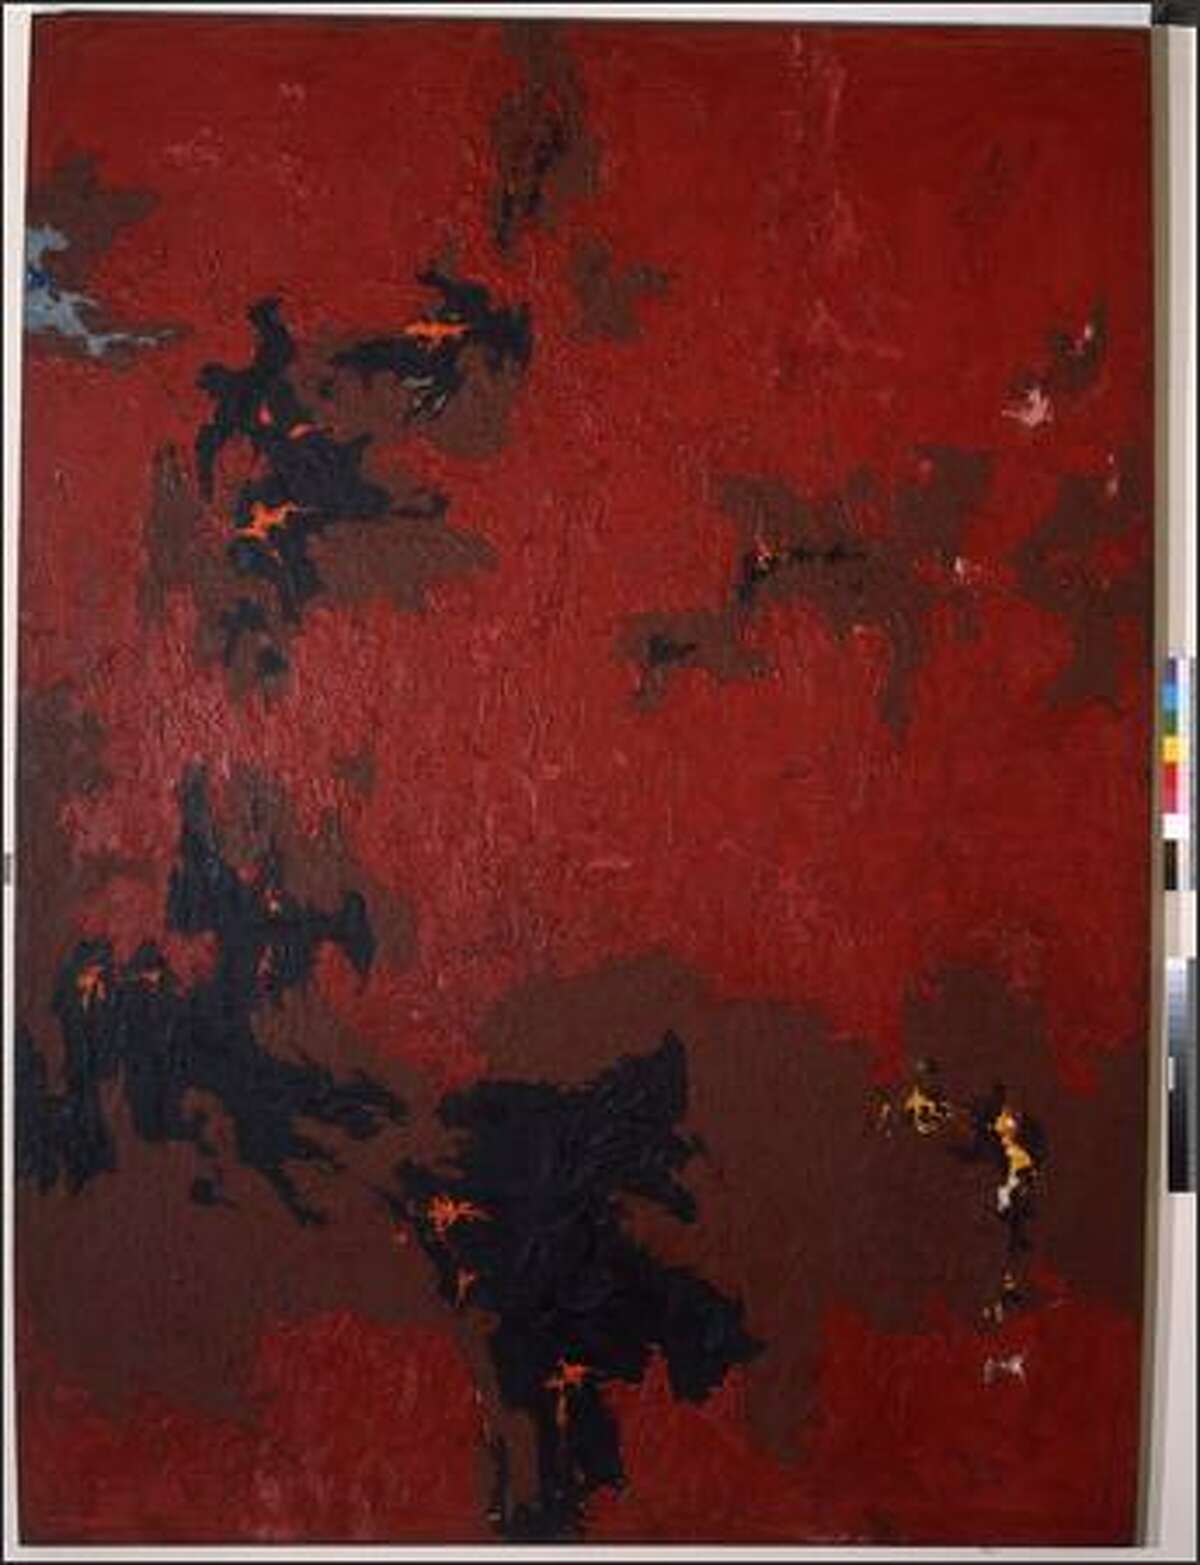 "Number 2, 1949" medium oil on canvas. Dimensions 91 3/4 x 68 7/8in. (233 x 174.9cm), 1949. By Clyfford Still. (From Jane Lang Davis)